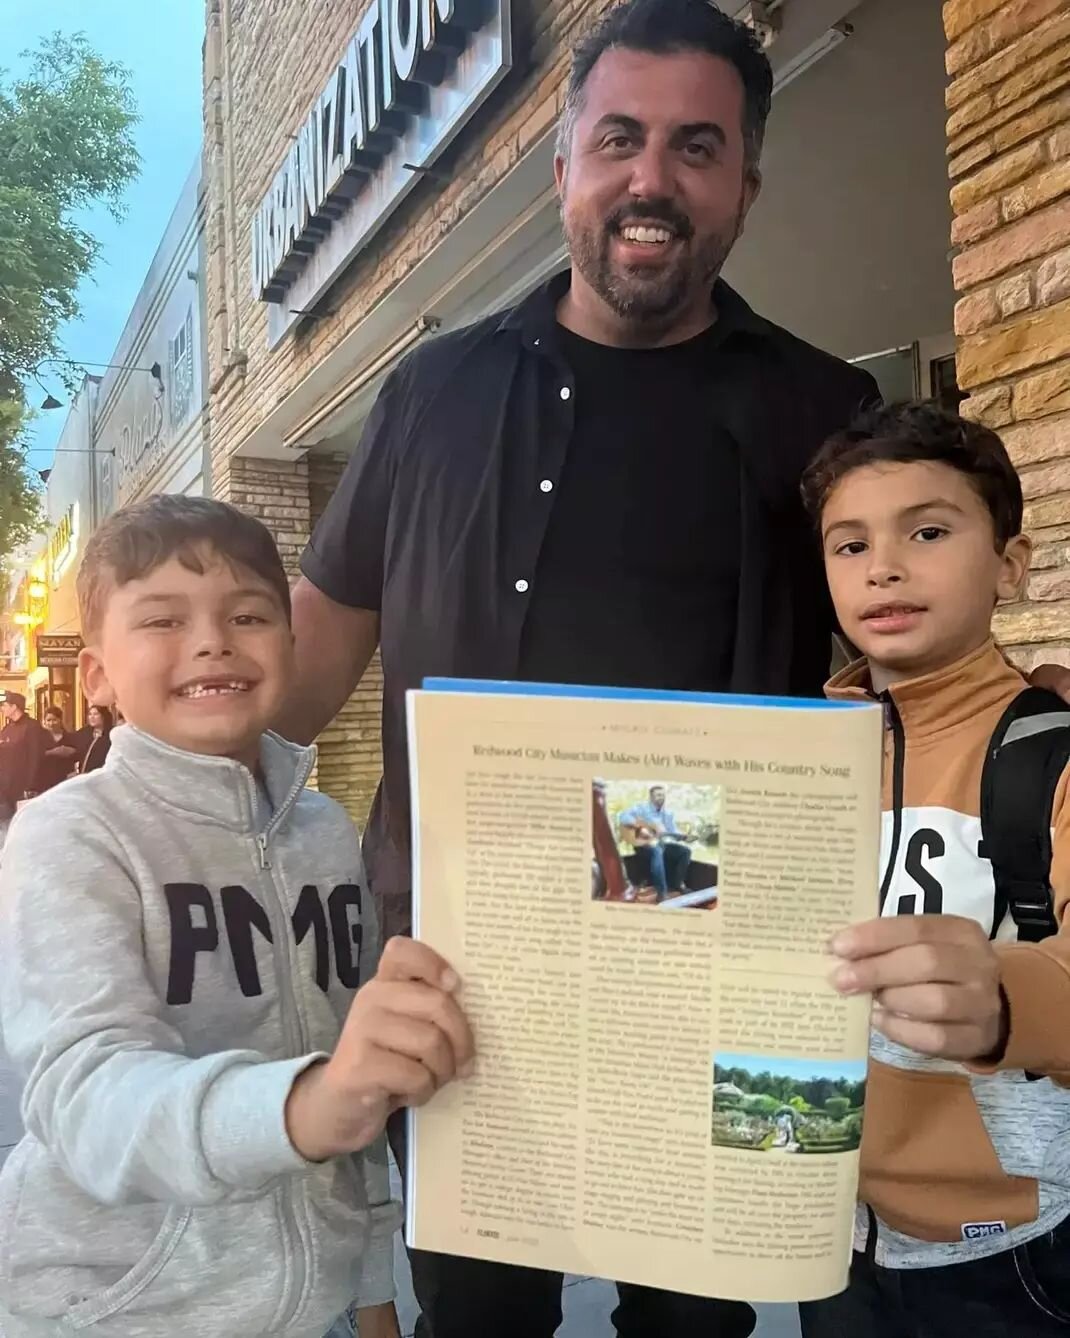 Two of my biggest and greatest fans found me in a magazine. Thank you @frank_ruggiero1 and family for your support! Can't wait to celebrate your 10 year anniversary at @delizie_italian_food tonight! @cityofsancarlos #auguri #mikeatthemic #sancarlosca